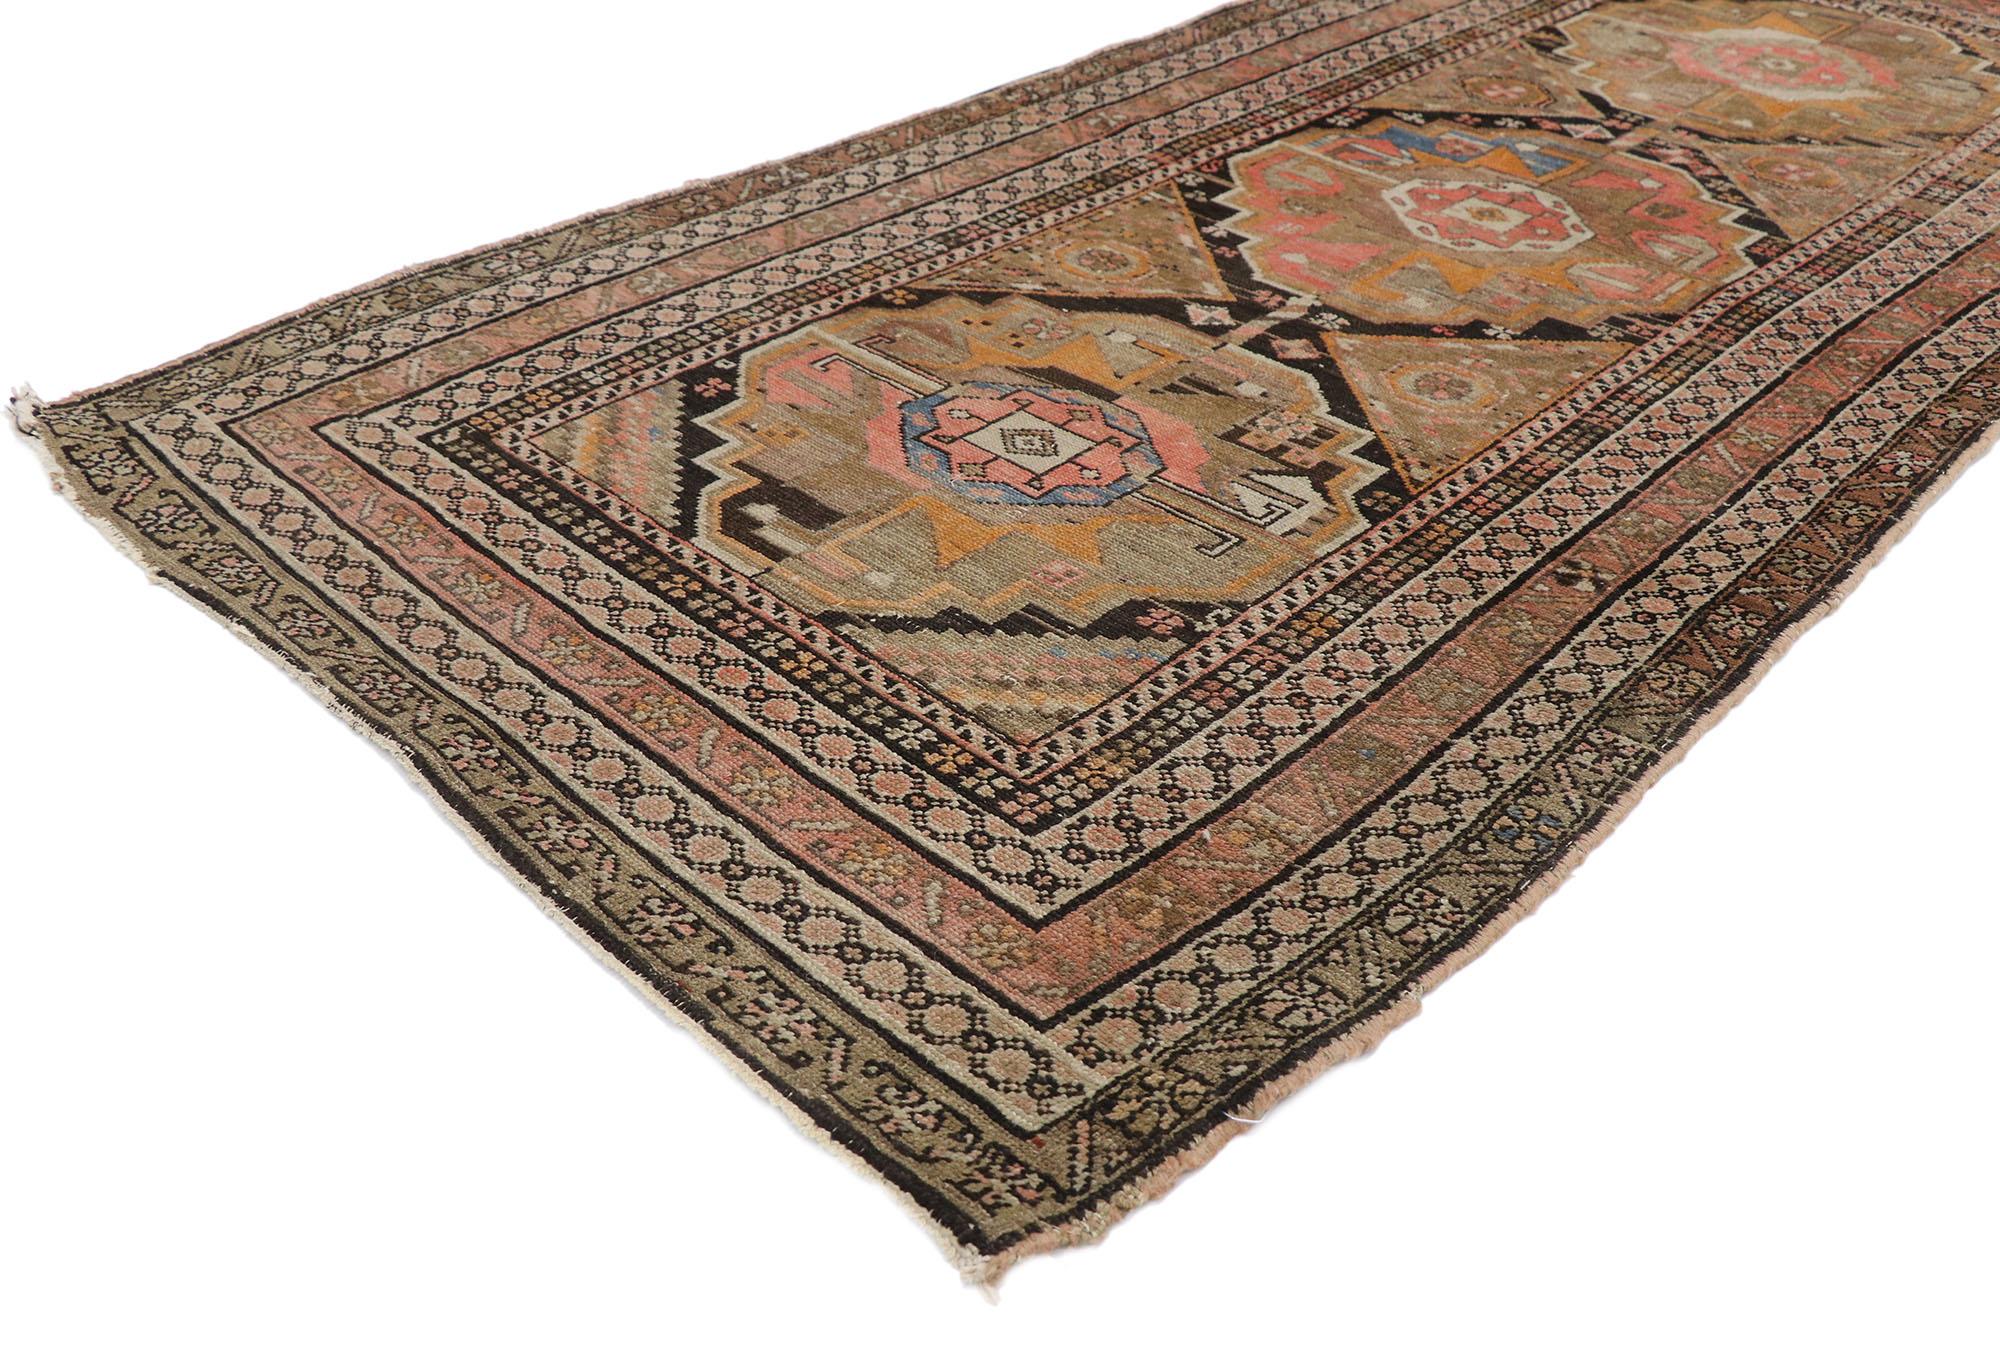 77653 antique Persian Malayer rug with Mid-Century Modern Bohemian style. Warm and inviting with bohemian style, this hand-knotted wool antique Persian Malayer rug features three stepped guls surrounded by a variety of ambiguous tribal motifs. It is